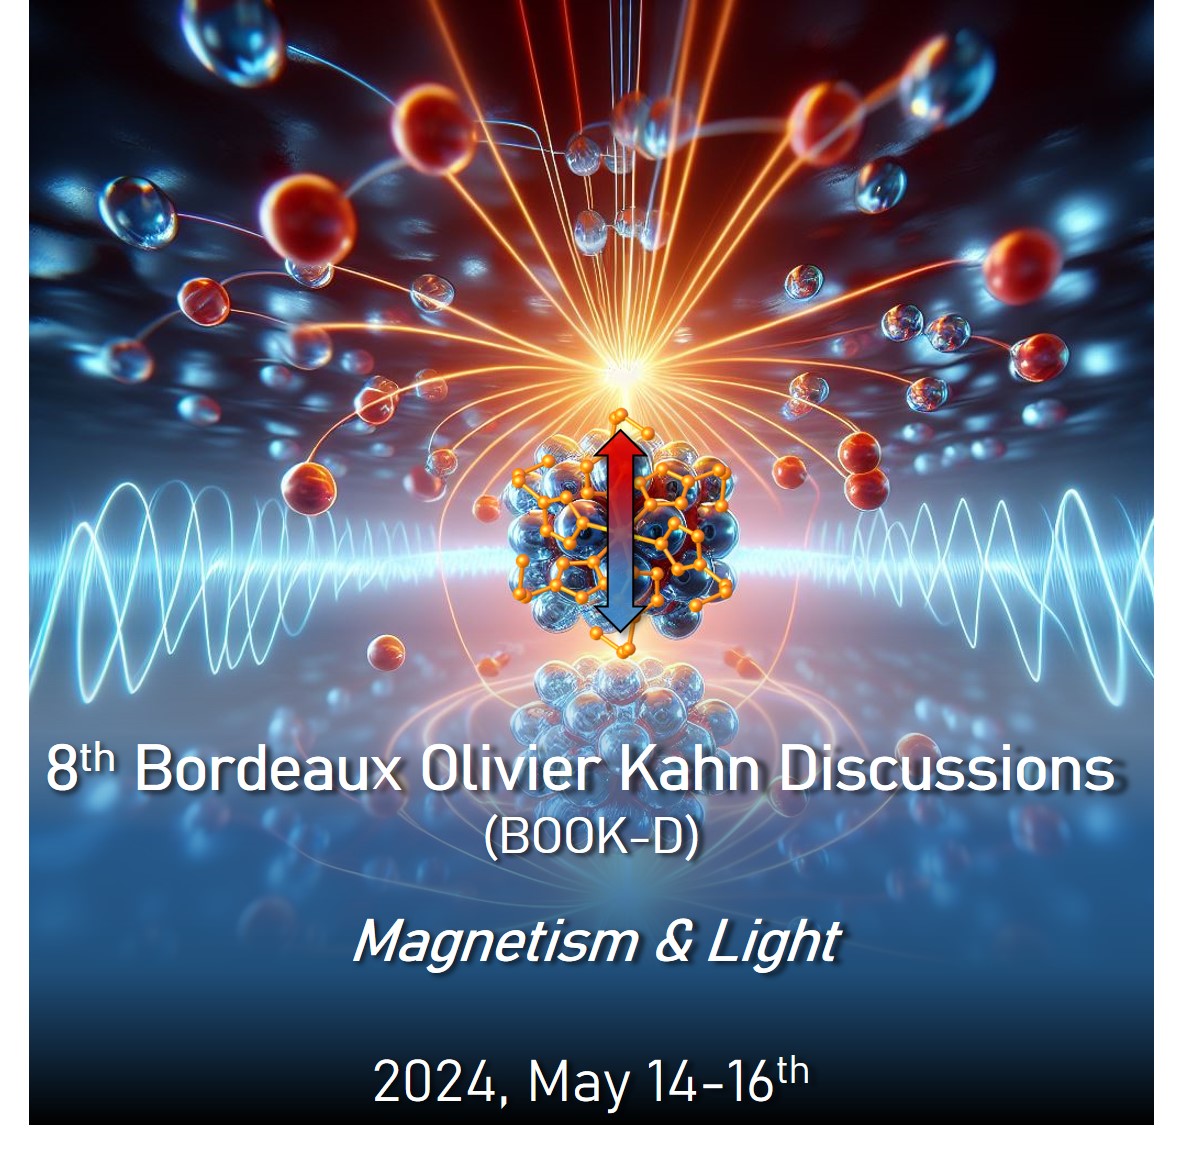 Happy to annouce the next Bordeaux Olivier Kahn Discussions in Bordeaux with great speakers. Save the date, you're all welcome. More information soon, keep your eyes open. book-d.cnrs.fr @icmcb @CRPP_Bx @am2_asso